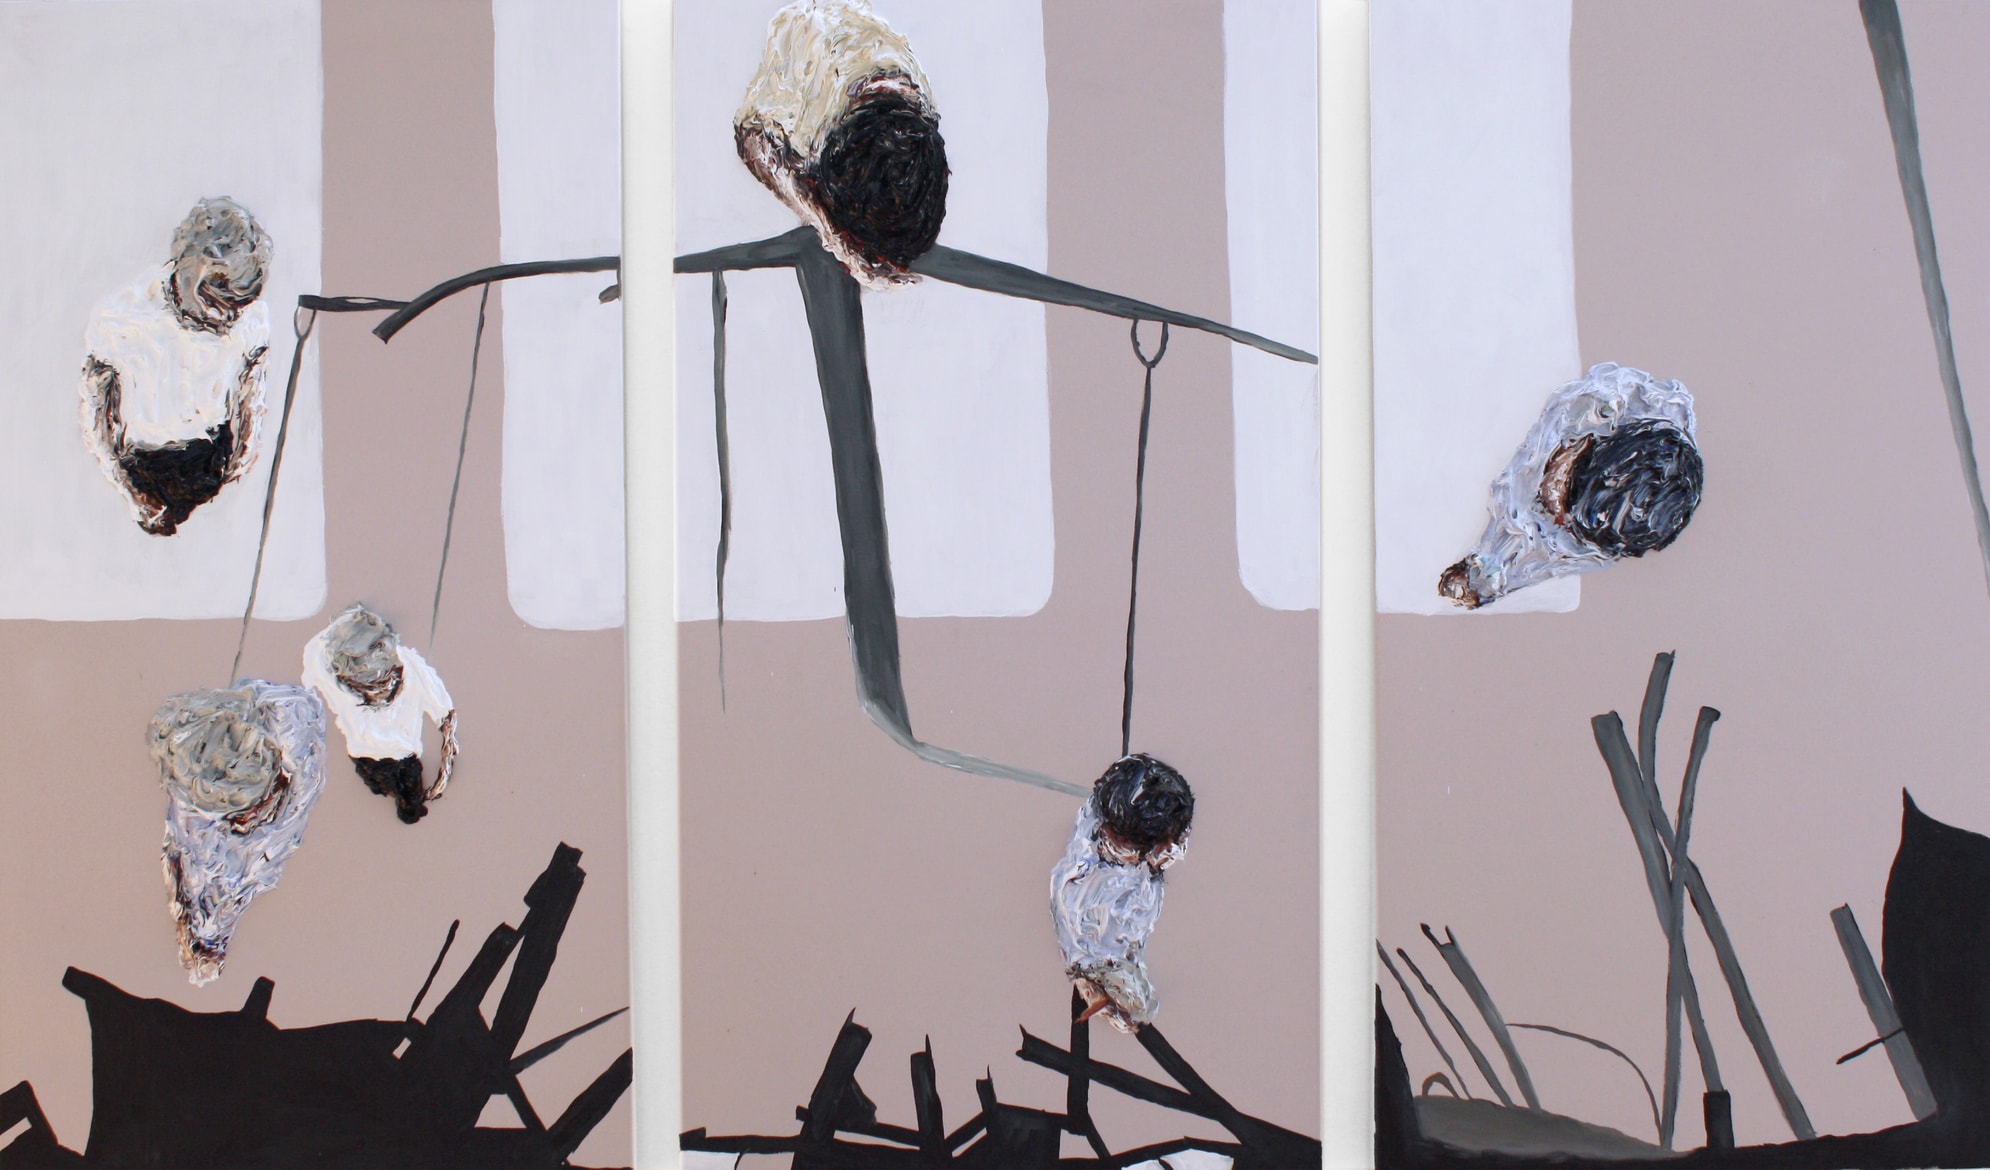 Untitled', 2015, oil on canvas, 3 panels each 130 x 70 cm, display size ca. 130 x 230cm